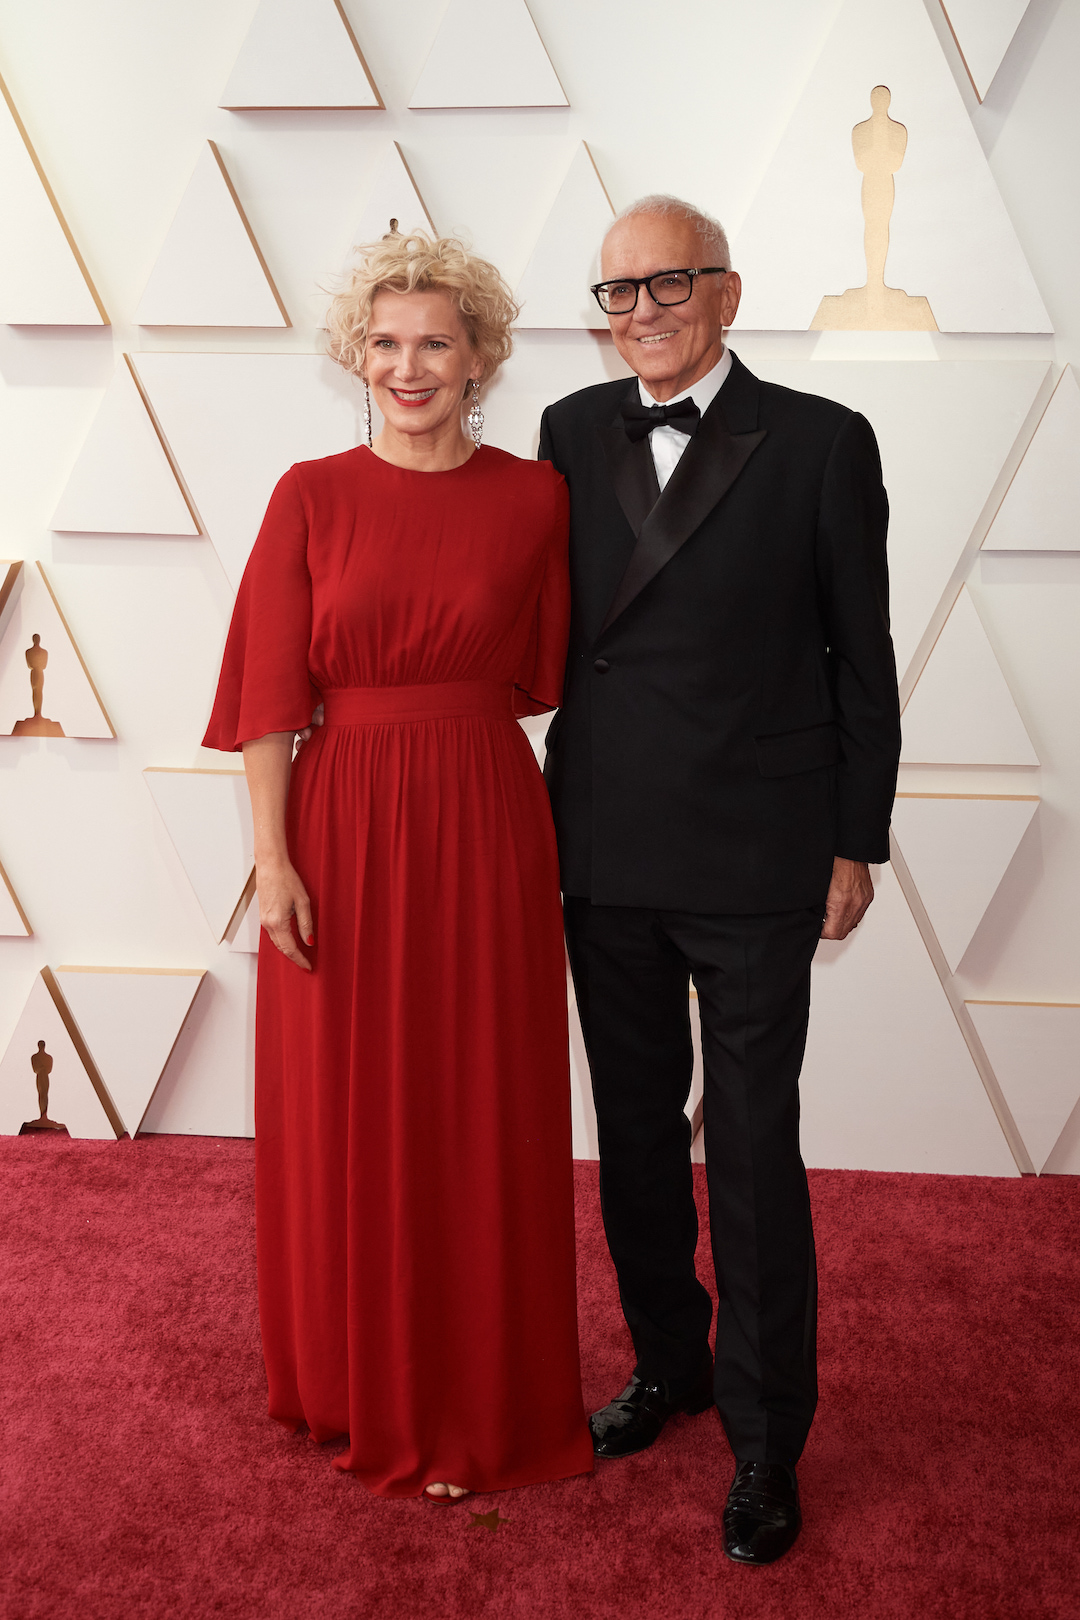 94th Oscars, Academy Awards 4Chion Lifestyle Roger Frappier